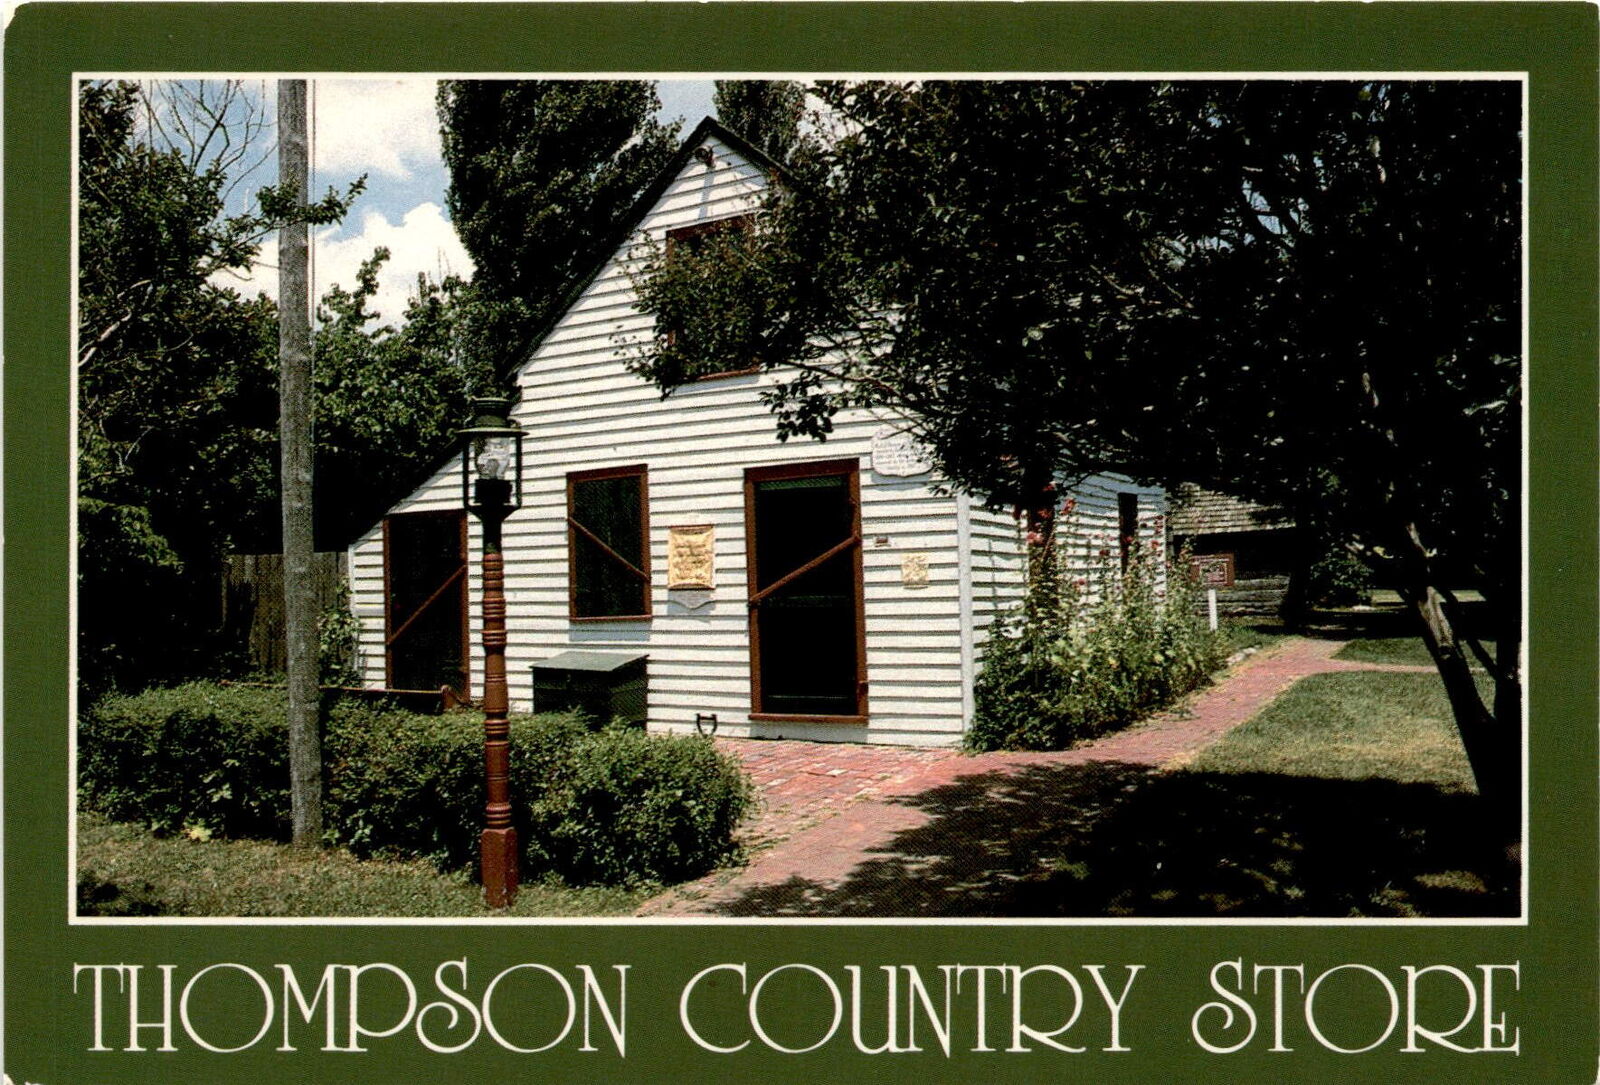 Thompson Country Store, Thompsonville, Delaware, Historical Complex postcard